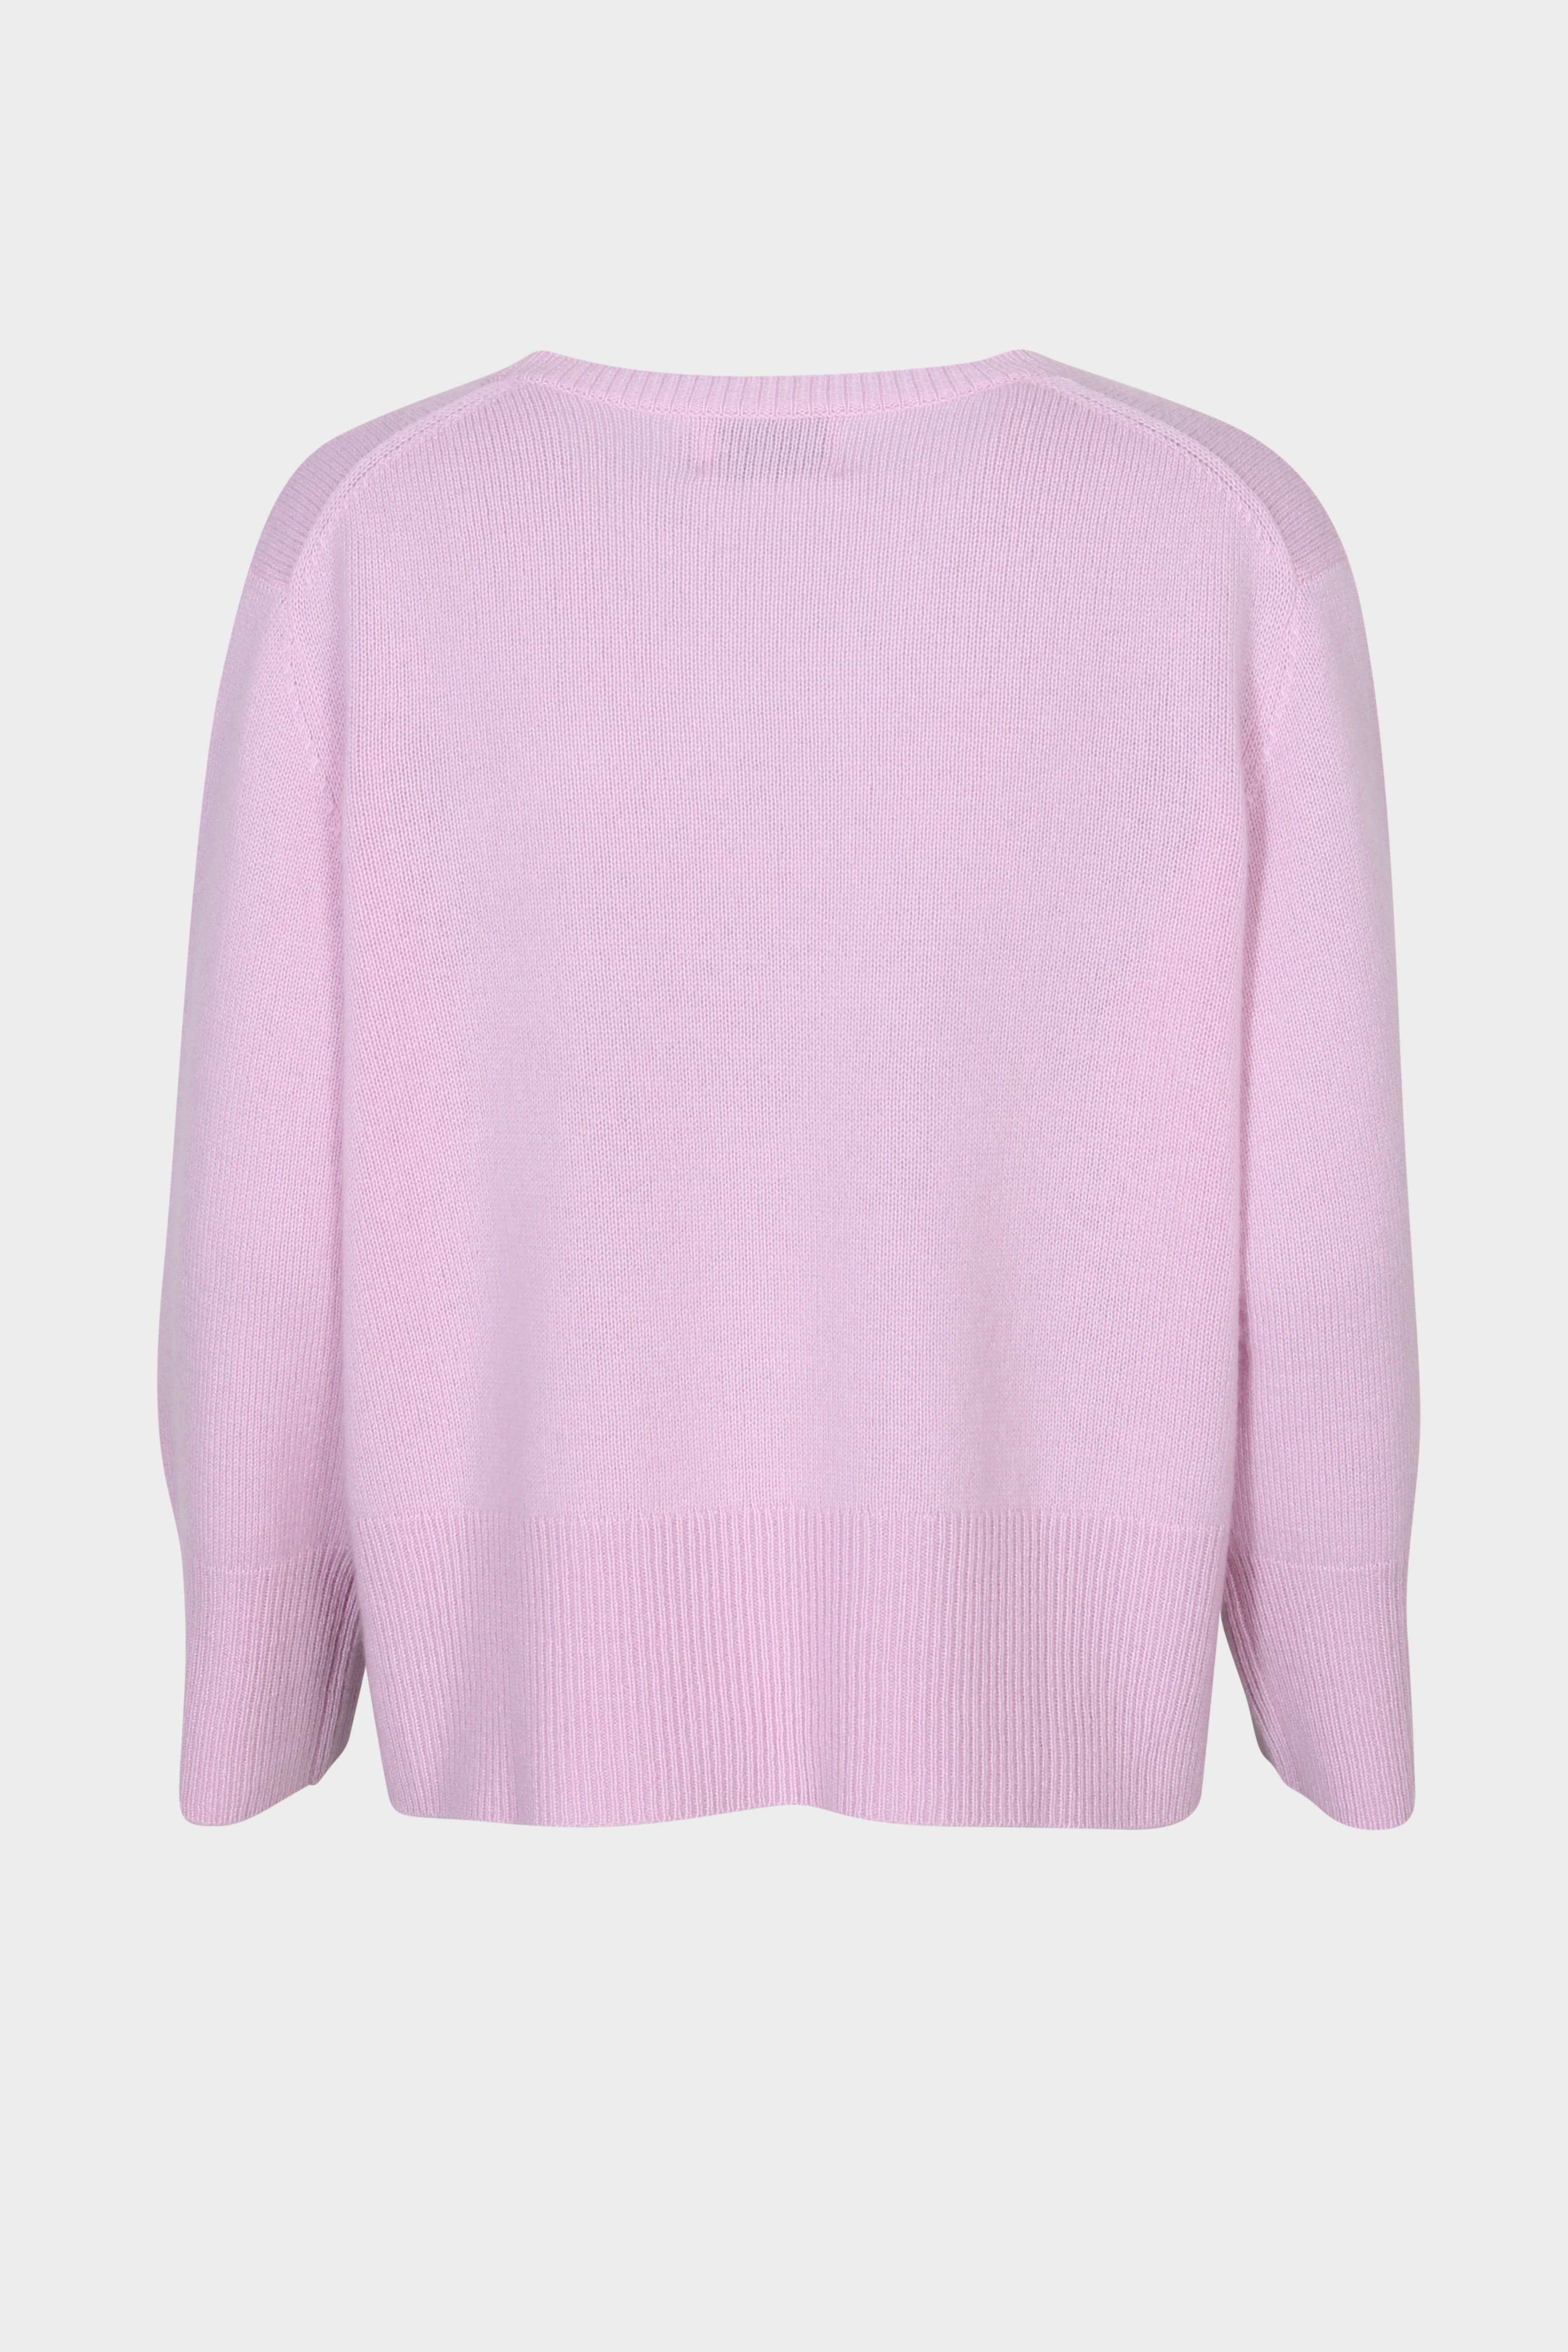 FLONA Cashmere Sweater in Pink L